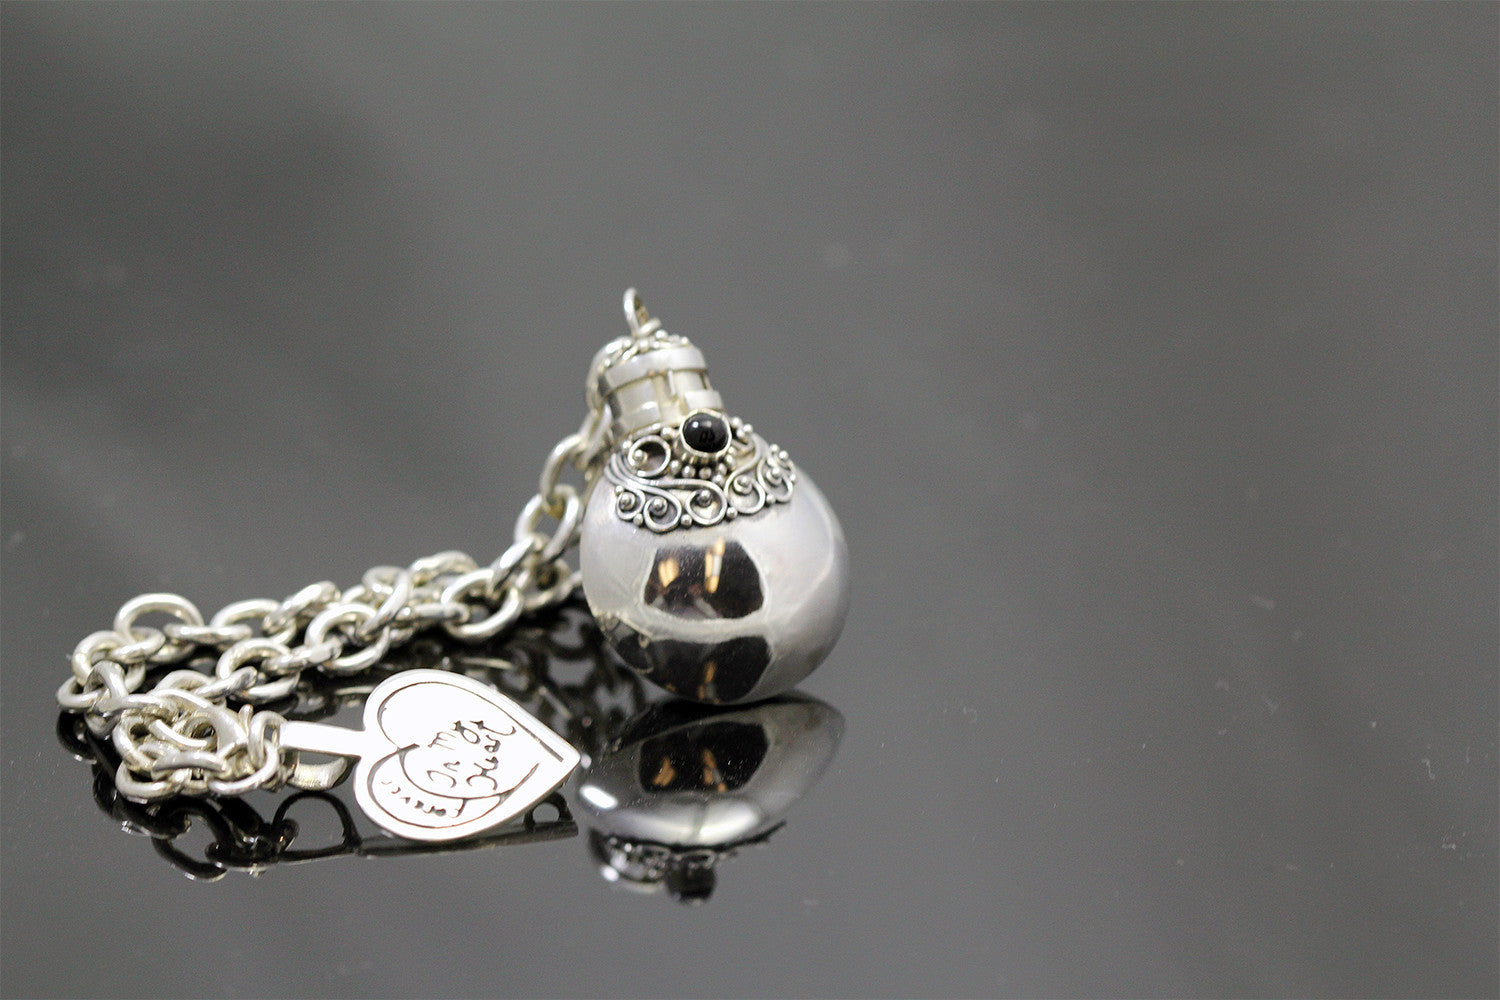 Handmade Sterling Silver Charm Bracelet with Round Charm with Choice of Gemstone